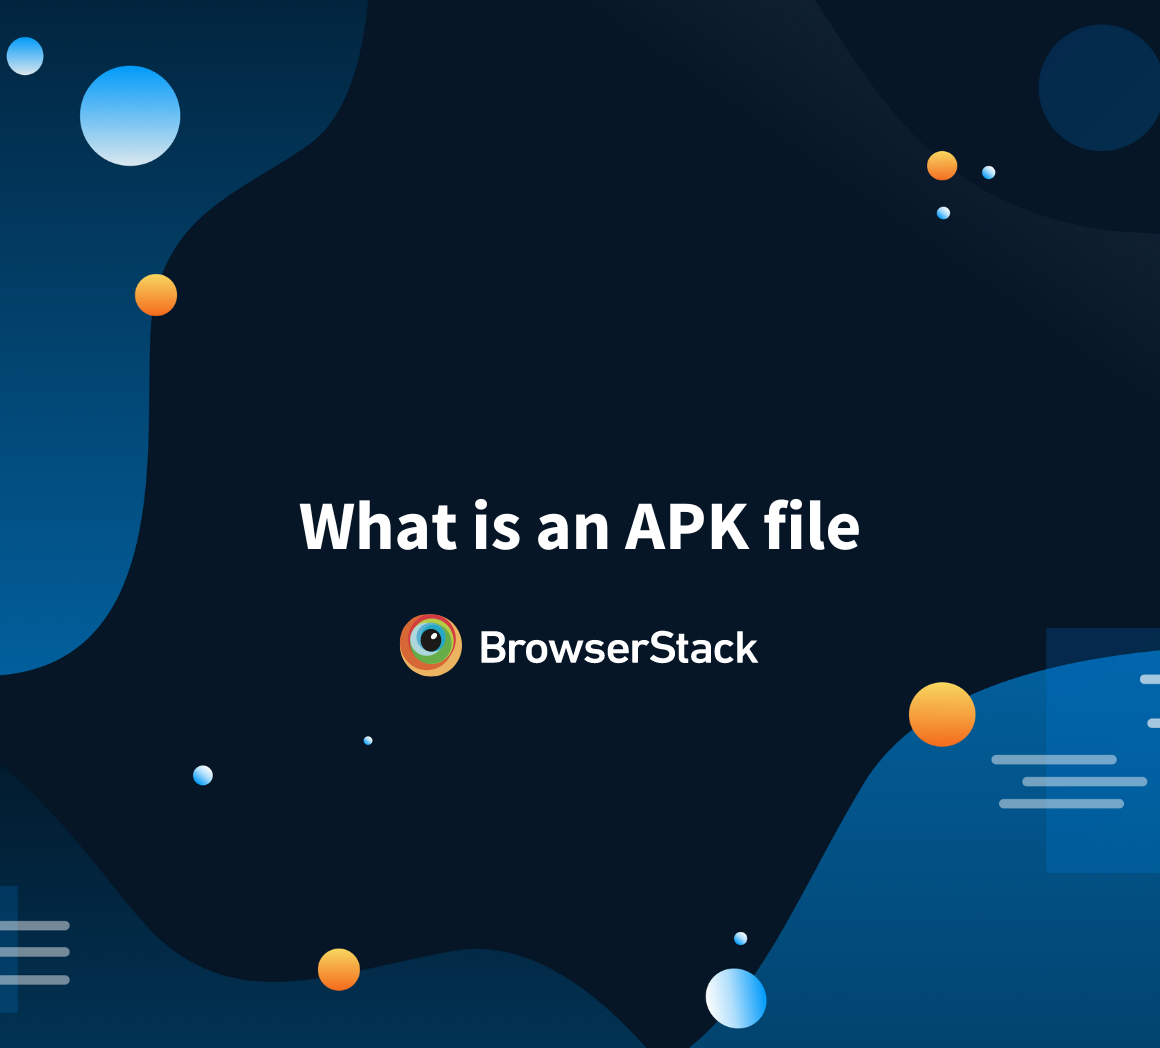 How to Run APK Online in a Browser